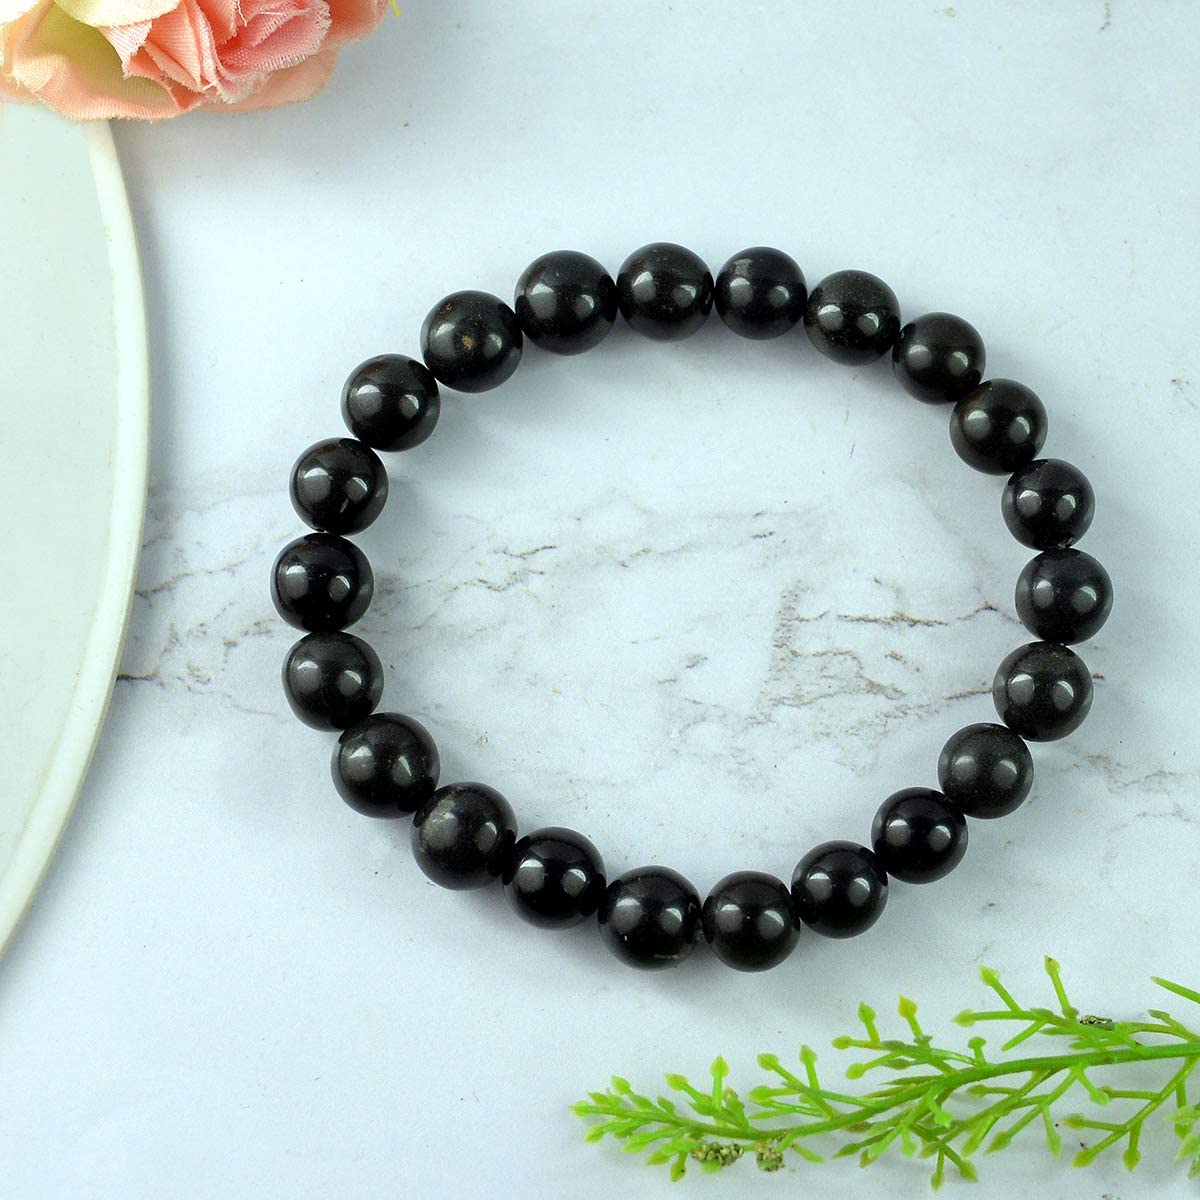 JEWEL BEADS,AAA++ Quality Black Banded Agate Bracelet, Black Stone Jewelry, Black  Agate Bracelet, Black Gemstone, Black Jewelry, Husband Gift Jewelry, Gift  for Women 10 mm Code- AU-917, : Amazon.in: Jewellery